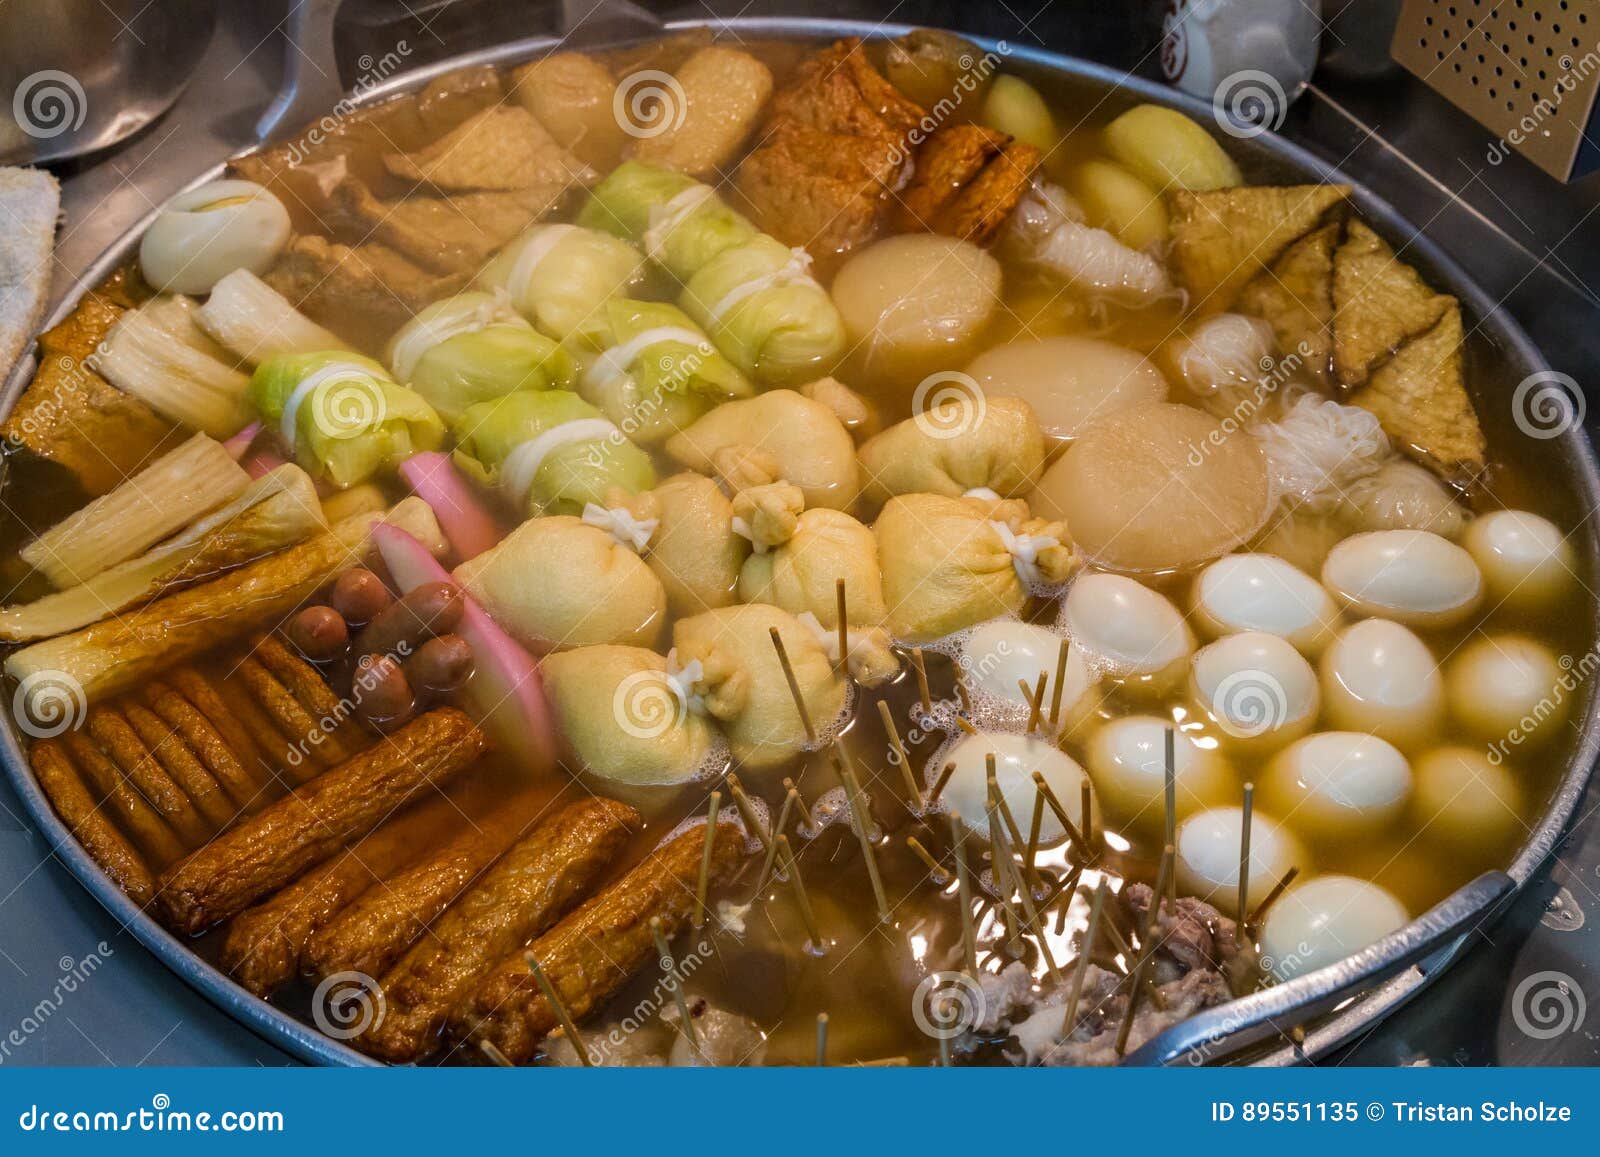 https://thumbs.dreamstime.com/z/large-pot-oden-japanese-winter-dish-hot-daikon-radish-boiled-eggs-sausages-cabbage-wraps-more-89551135.jpg